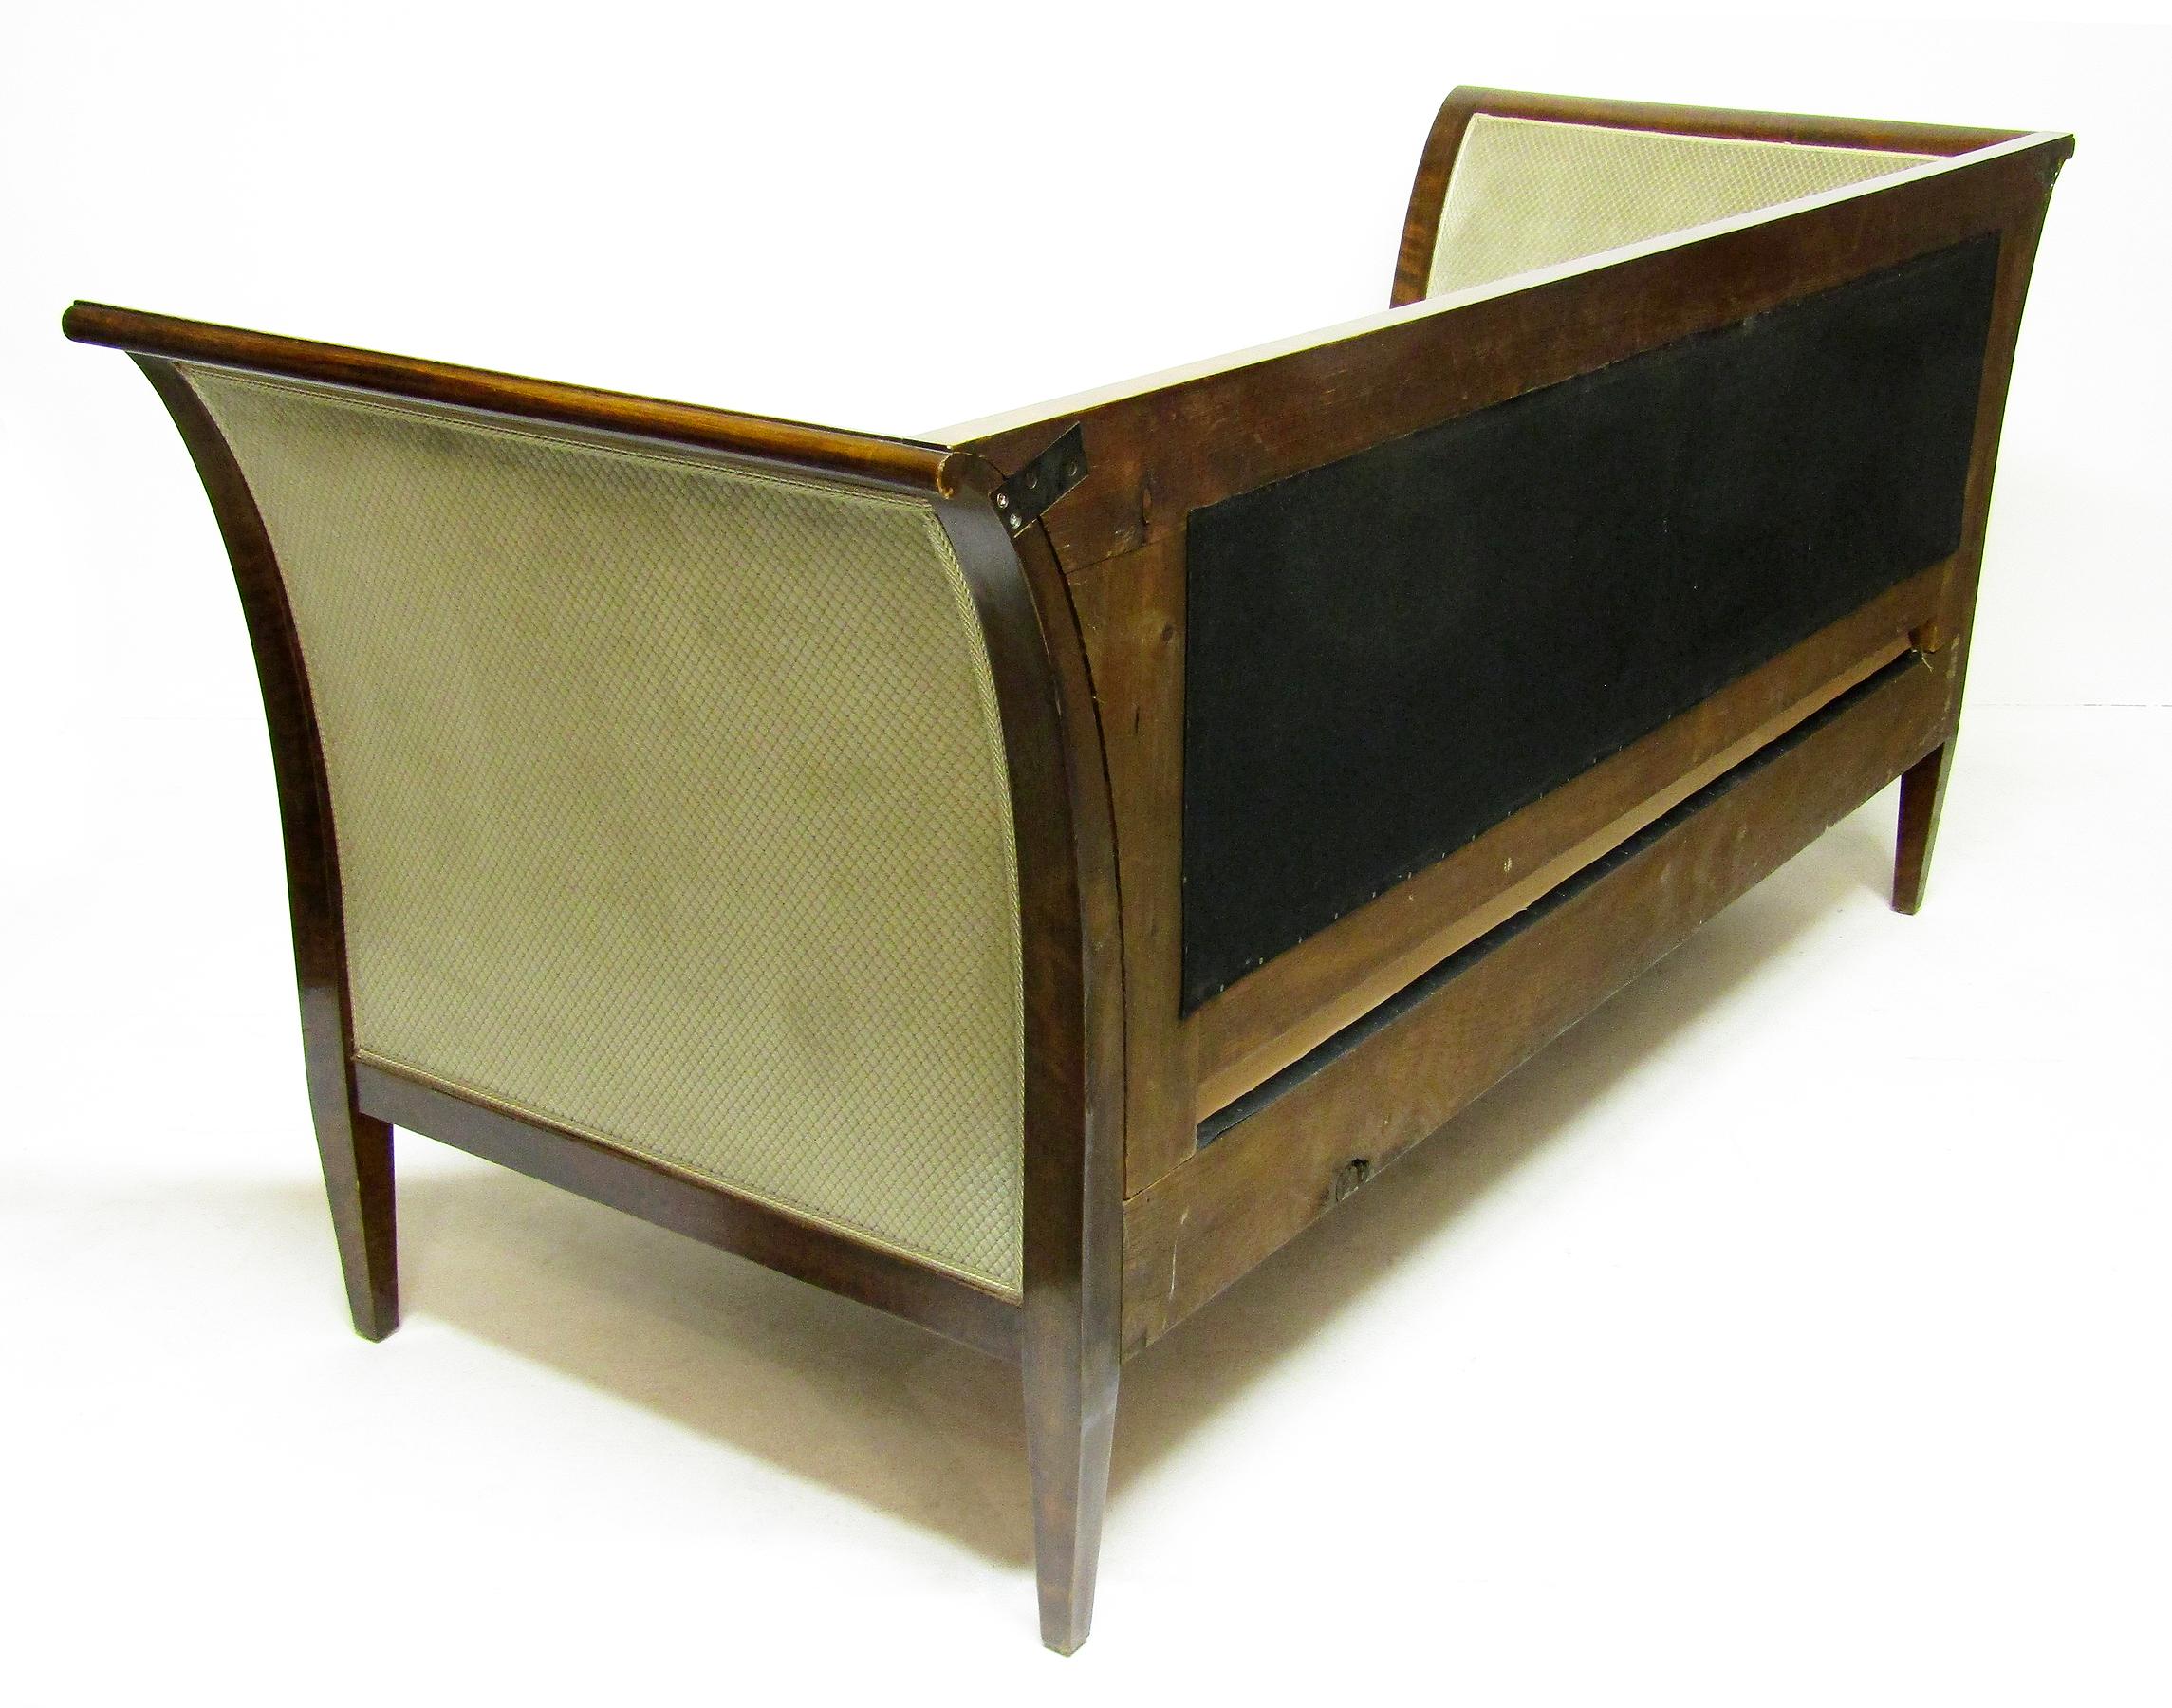 1930s Danish Art Deco 3-Seater Sofa In Cuban Mahogany By Frits Henningsen For Sale 2